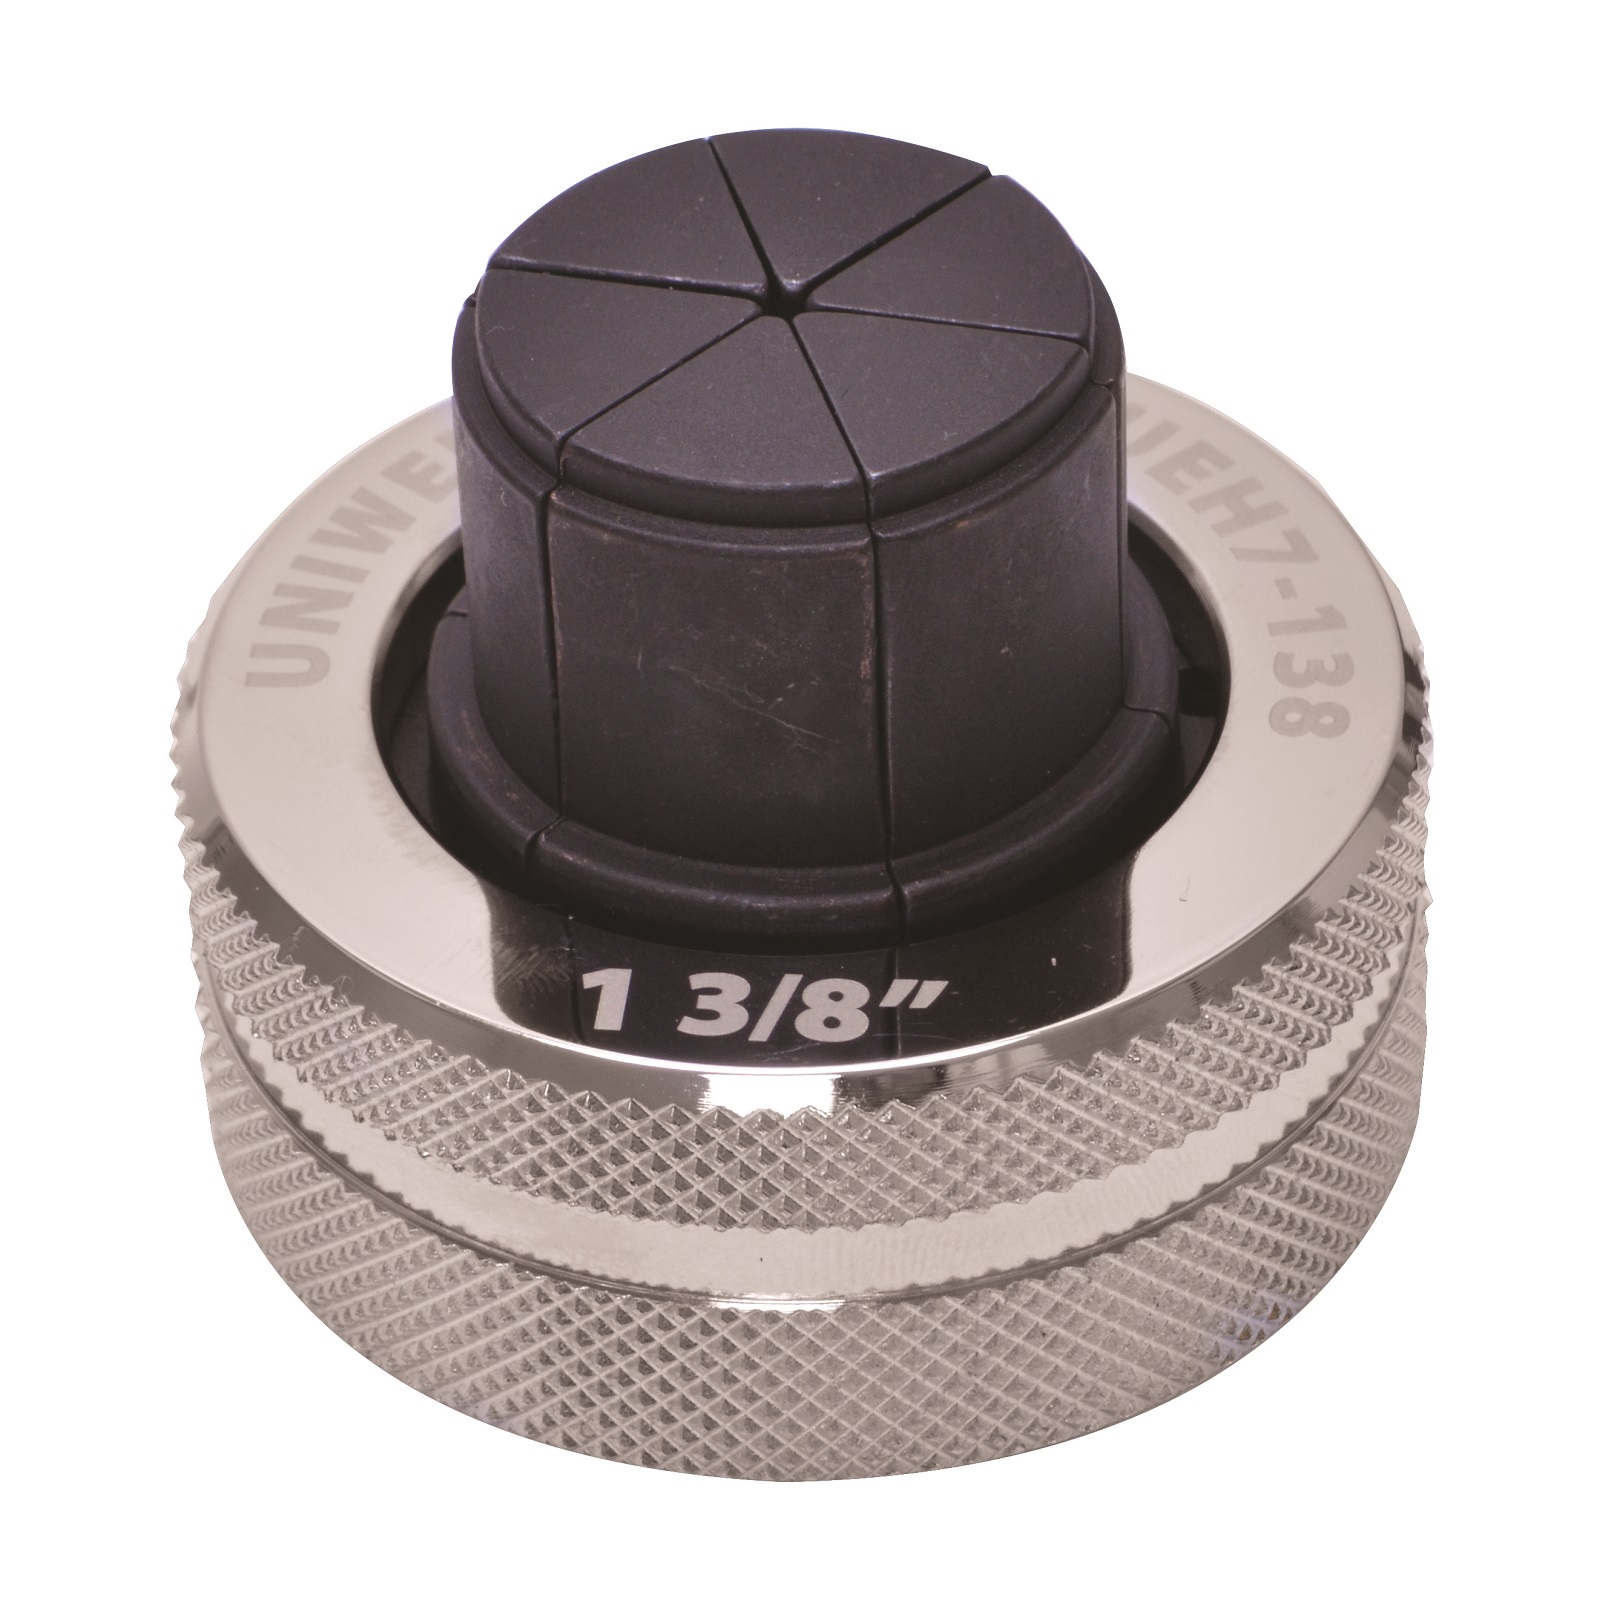 Uniweld UEH5-78 Expander Head with 7/8 O.D. 